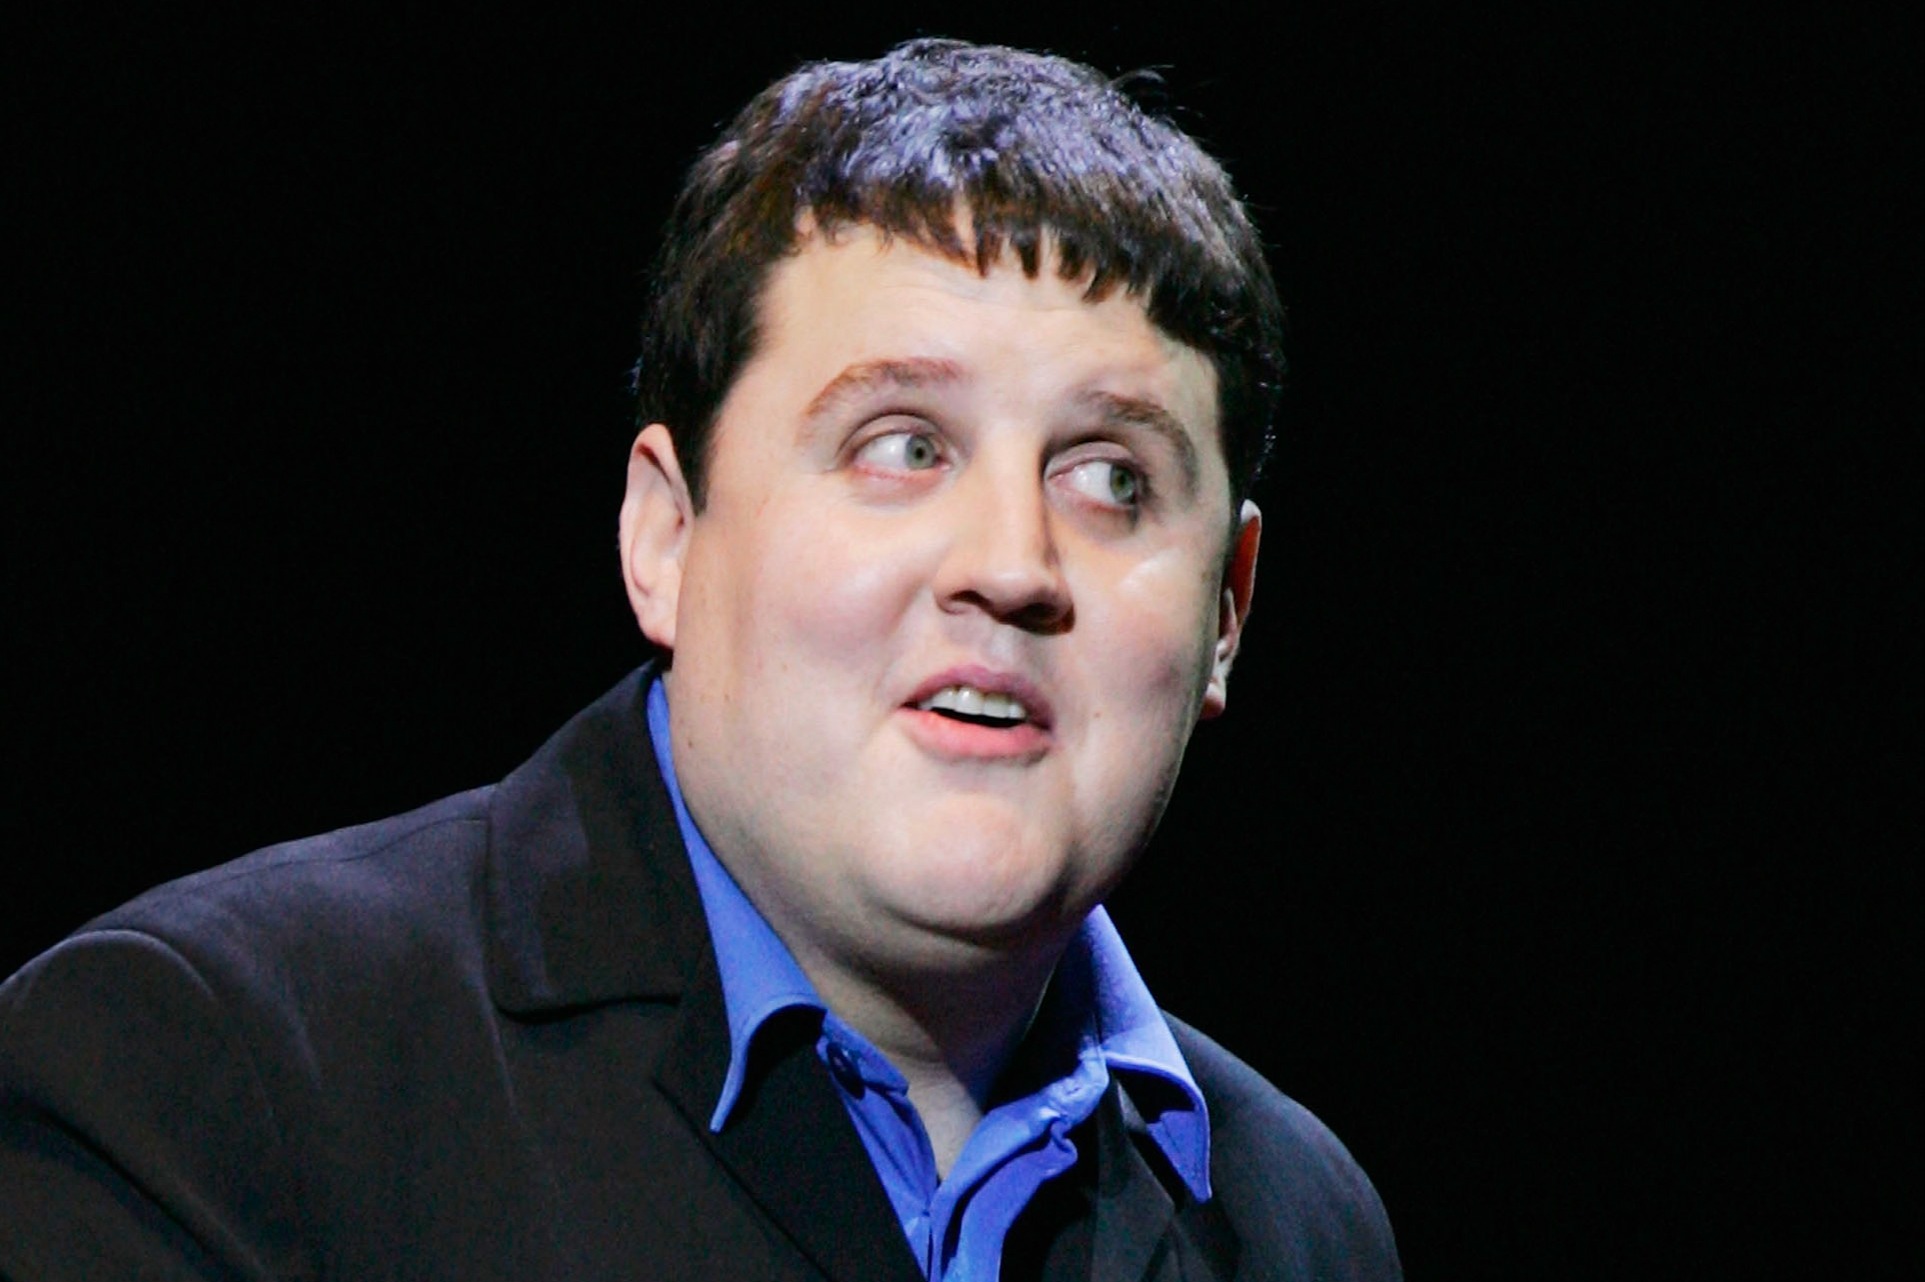 Peter Kay cancels stand up shows AGAIN - telling fans 'I can't believe it'